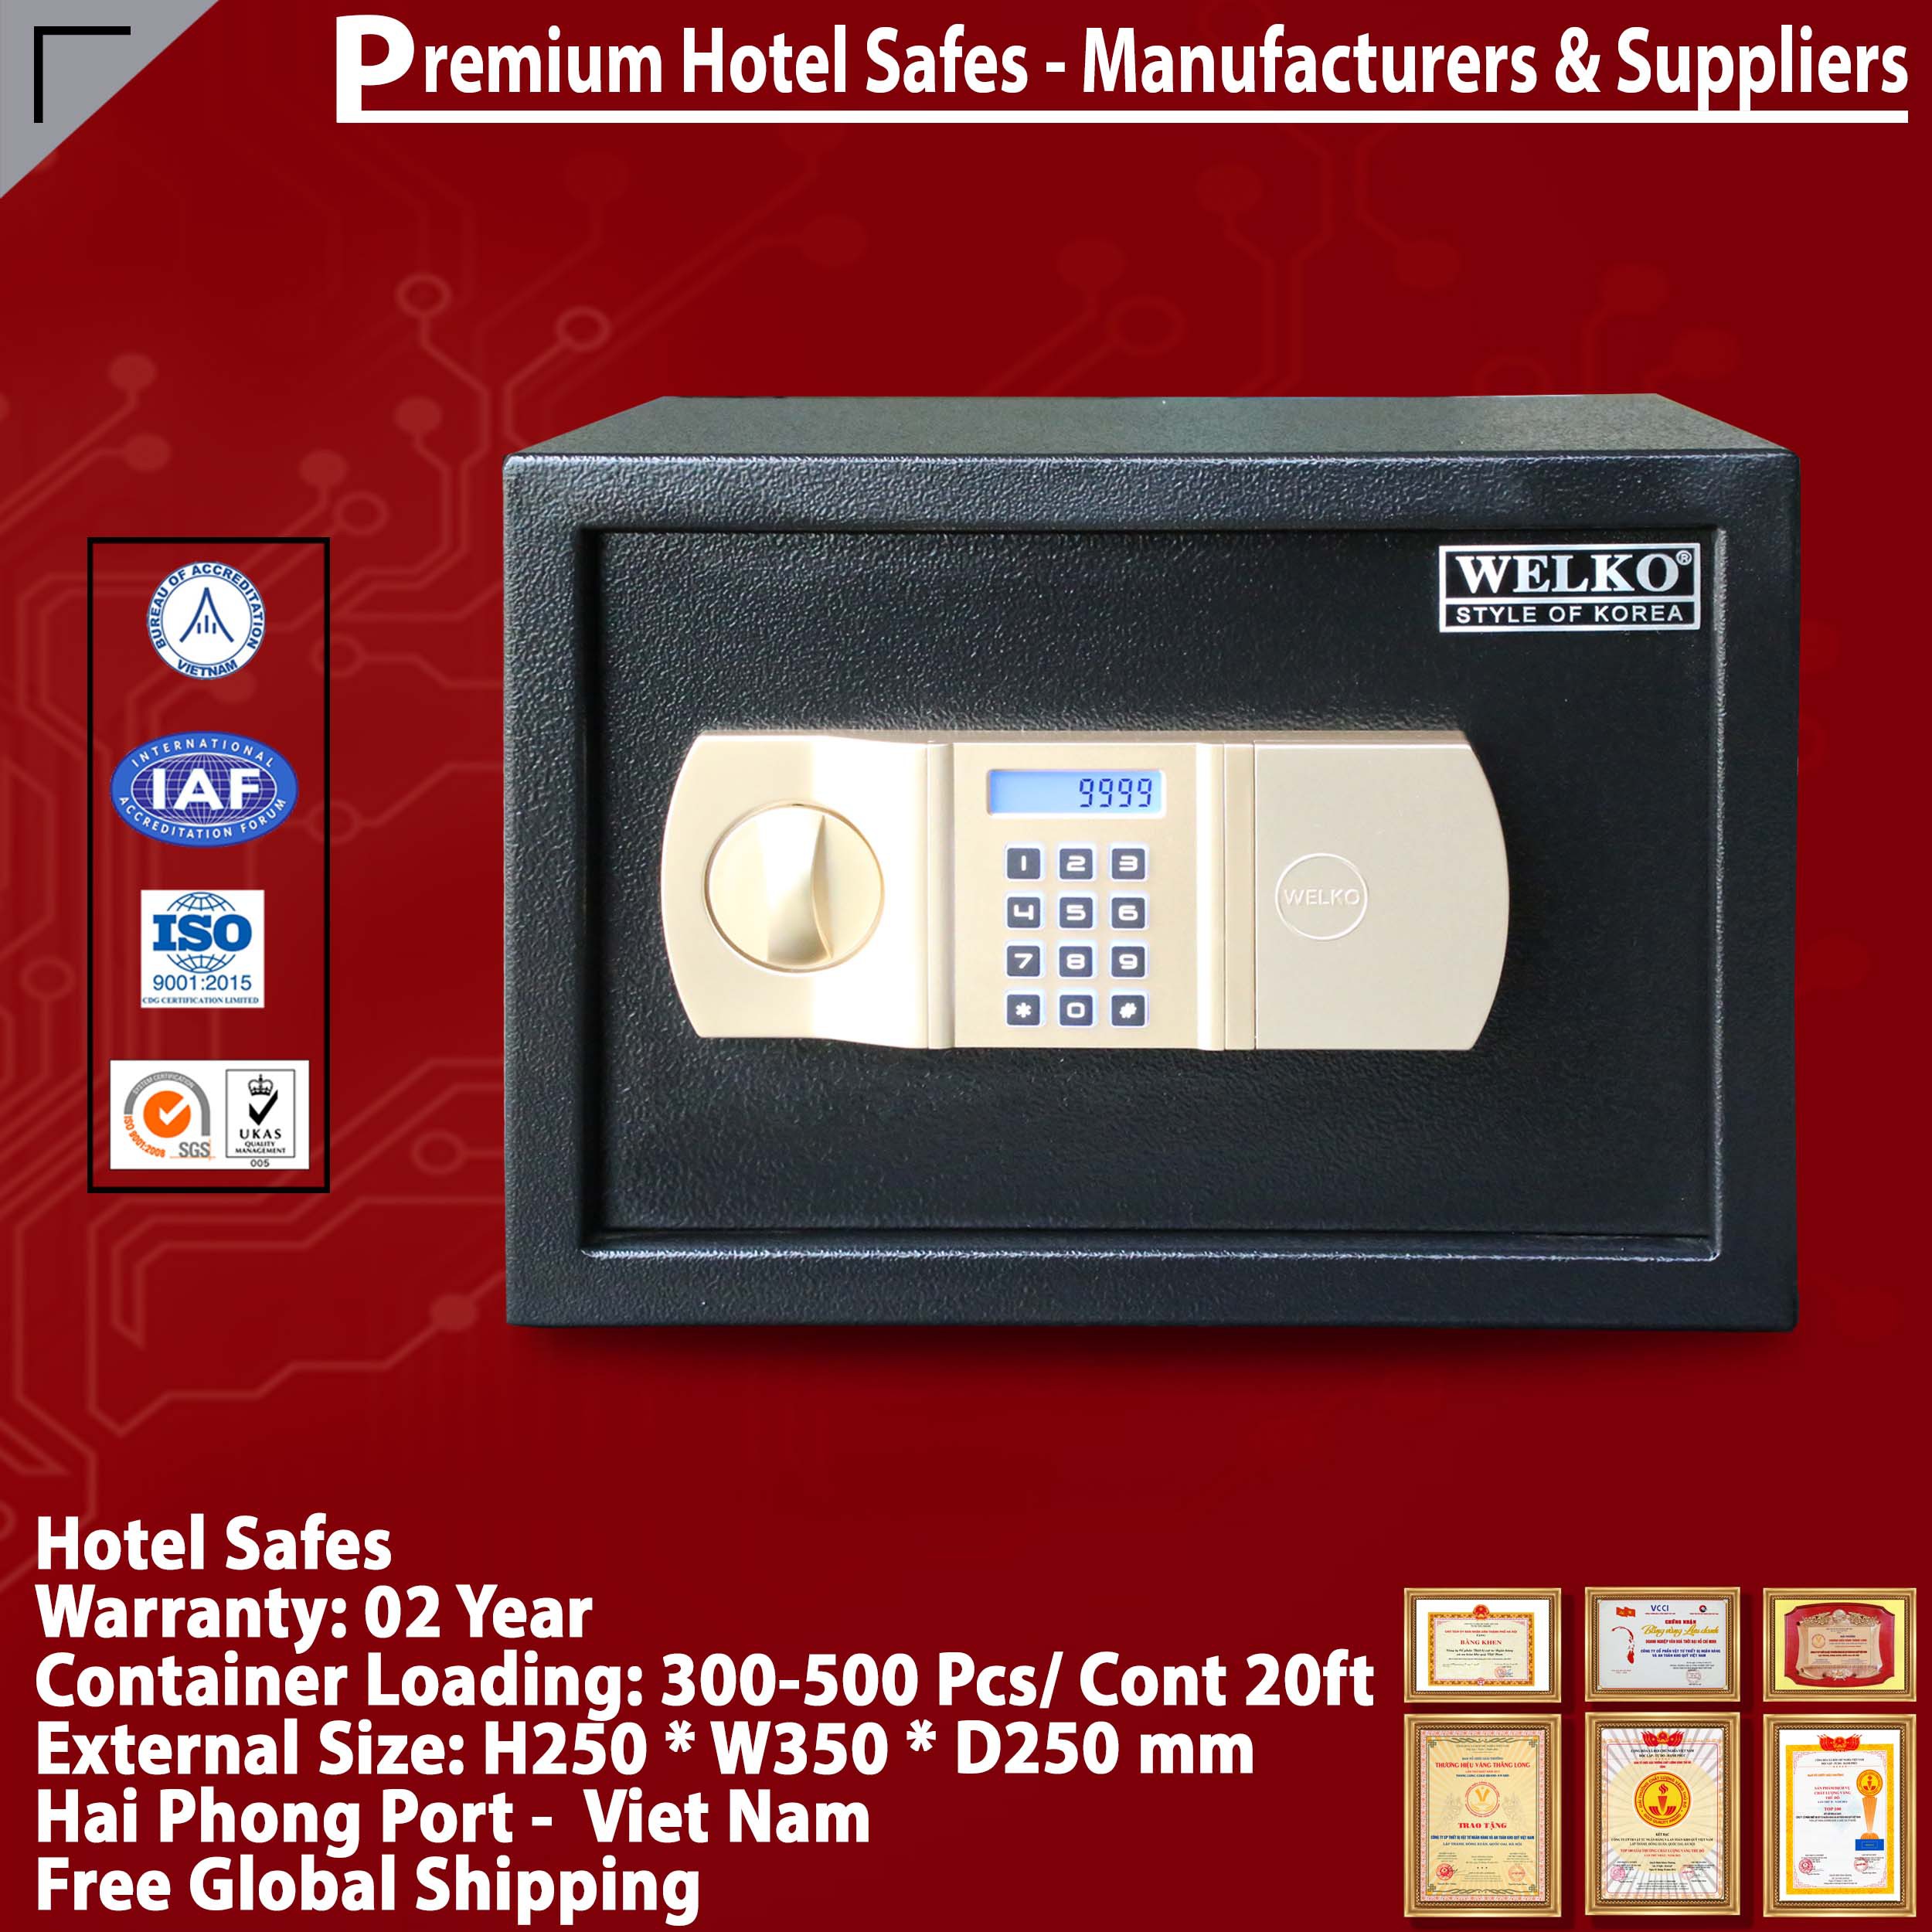 Best Sellers In Hotel SafesFactory Direct & Fast Shipping‎